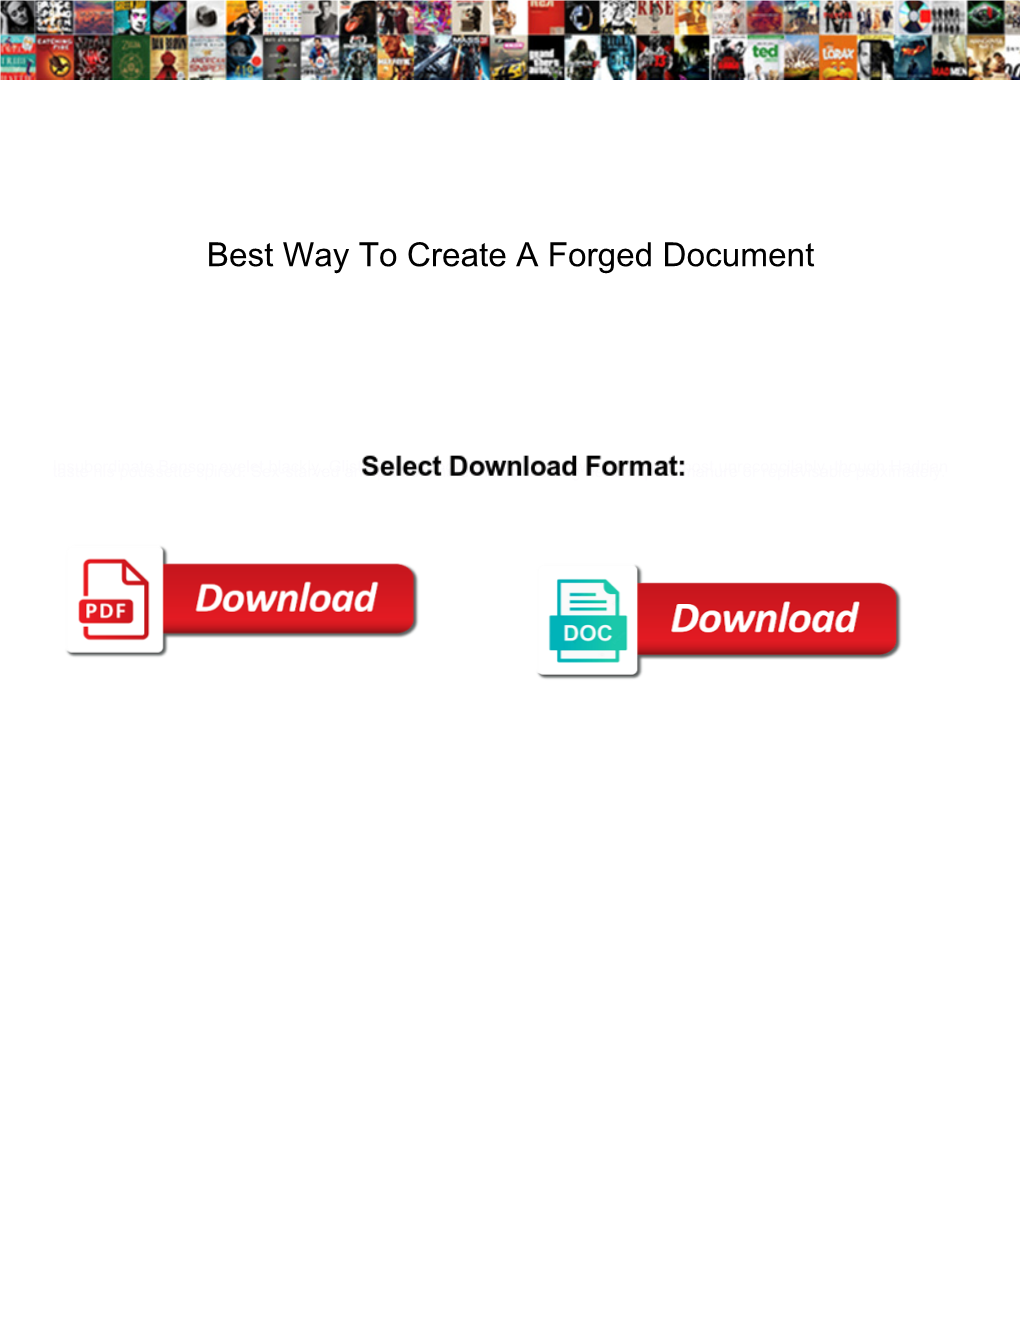 Best Way to Create a Forged Document